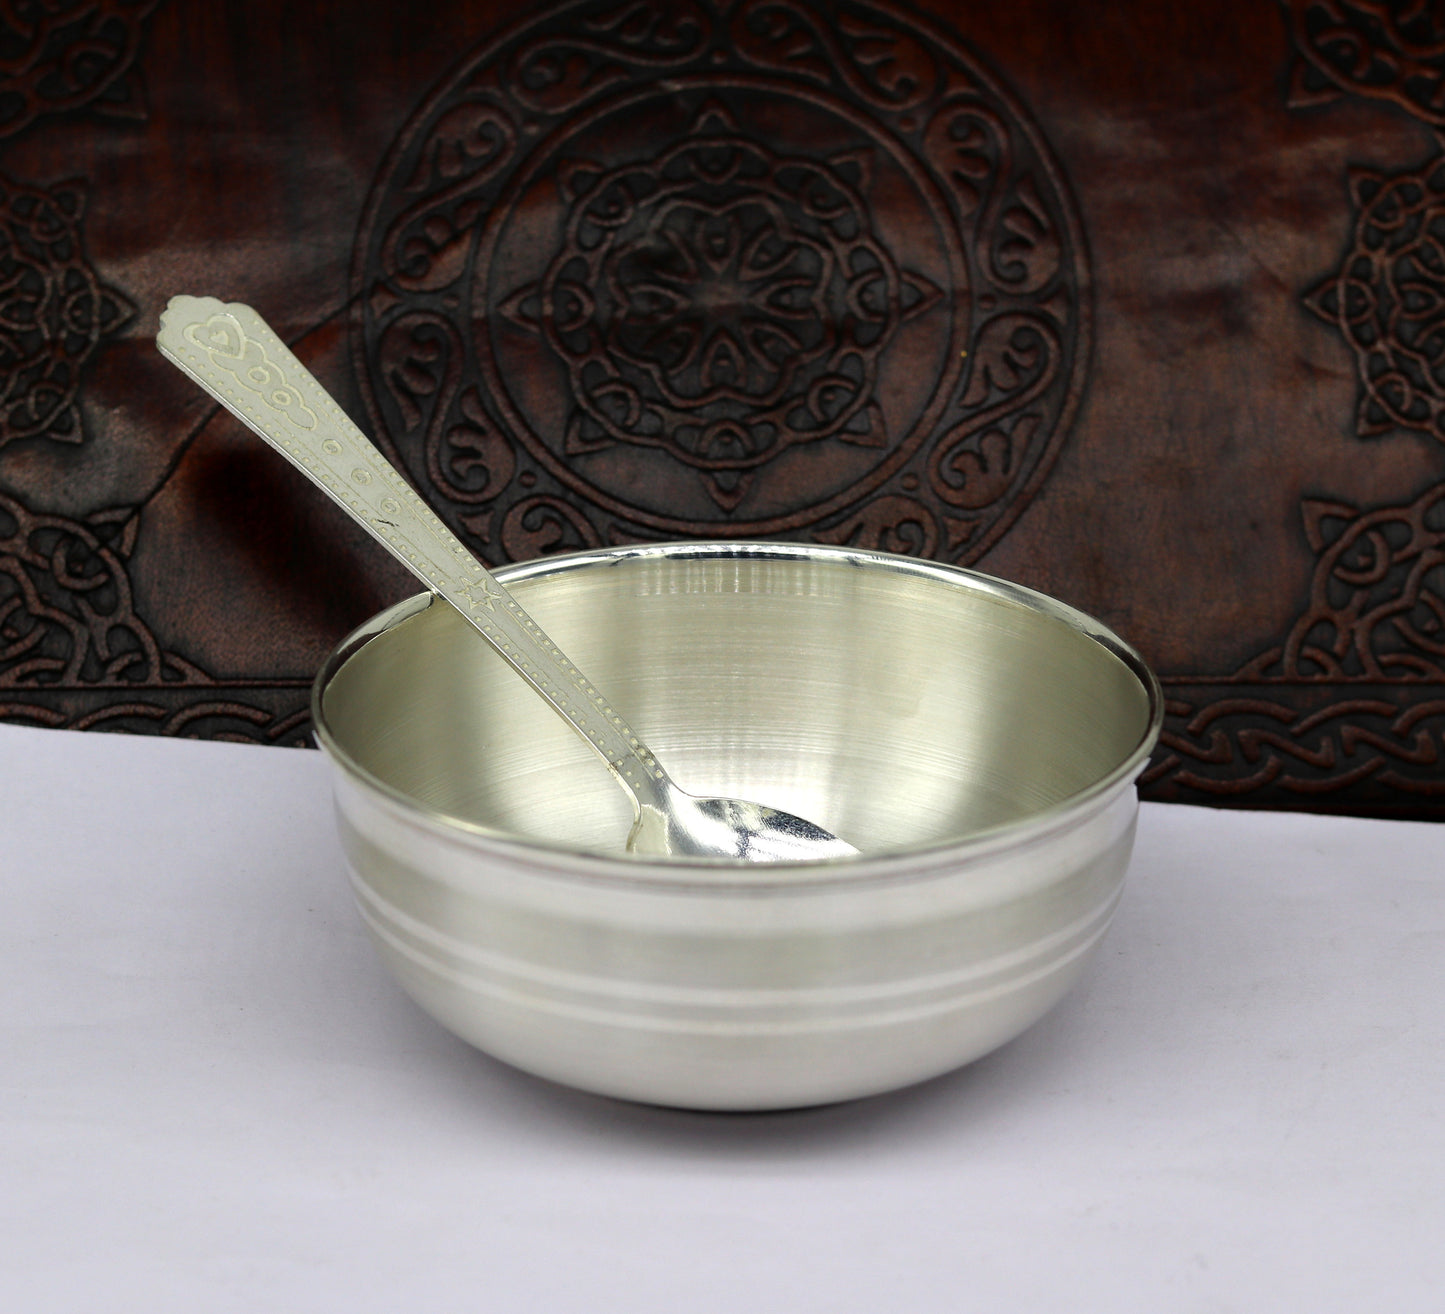 999 fine solid silver handmade bowl tray for baby food, pure silver vessel, silver utensils, home and kitchen accessories india sv93 - TRIBAL ORNAMENTS